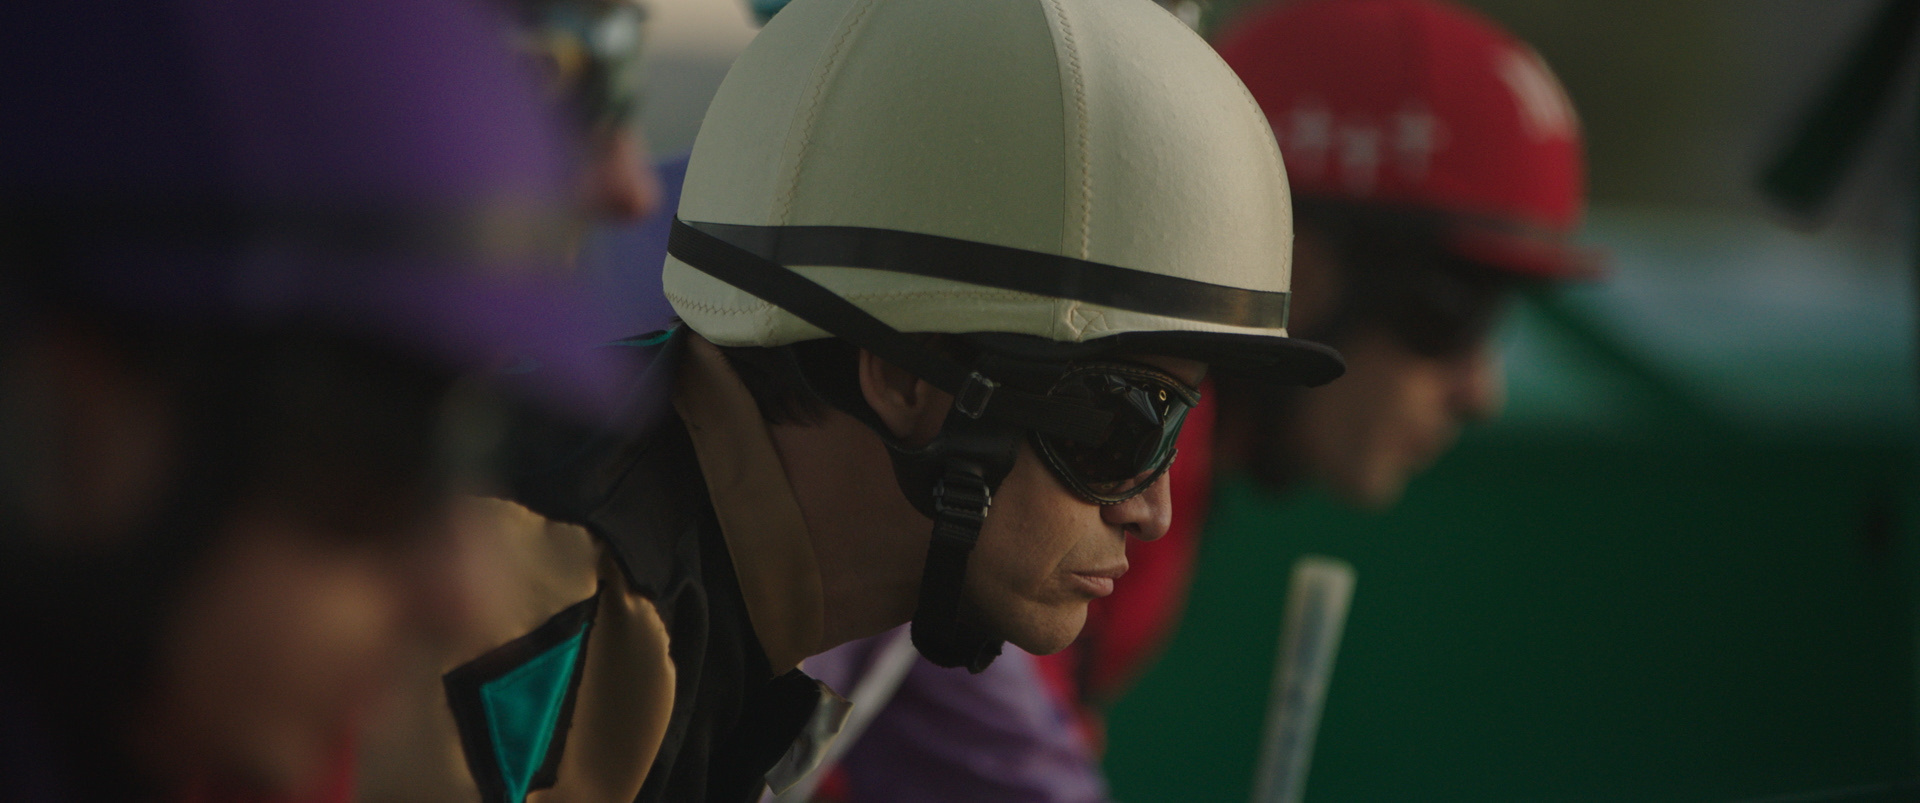 Greg Kwedar And Clint Bentley Cover The Struggles Of A Jockey [Exclusive Interview]